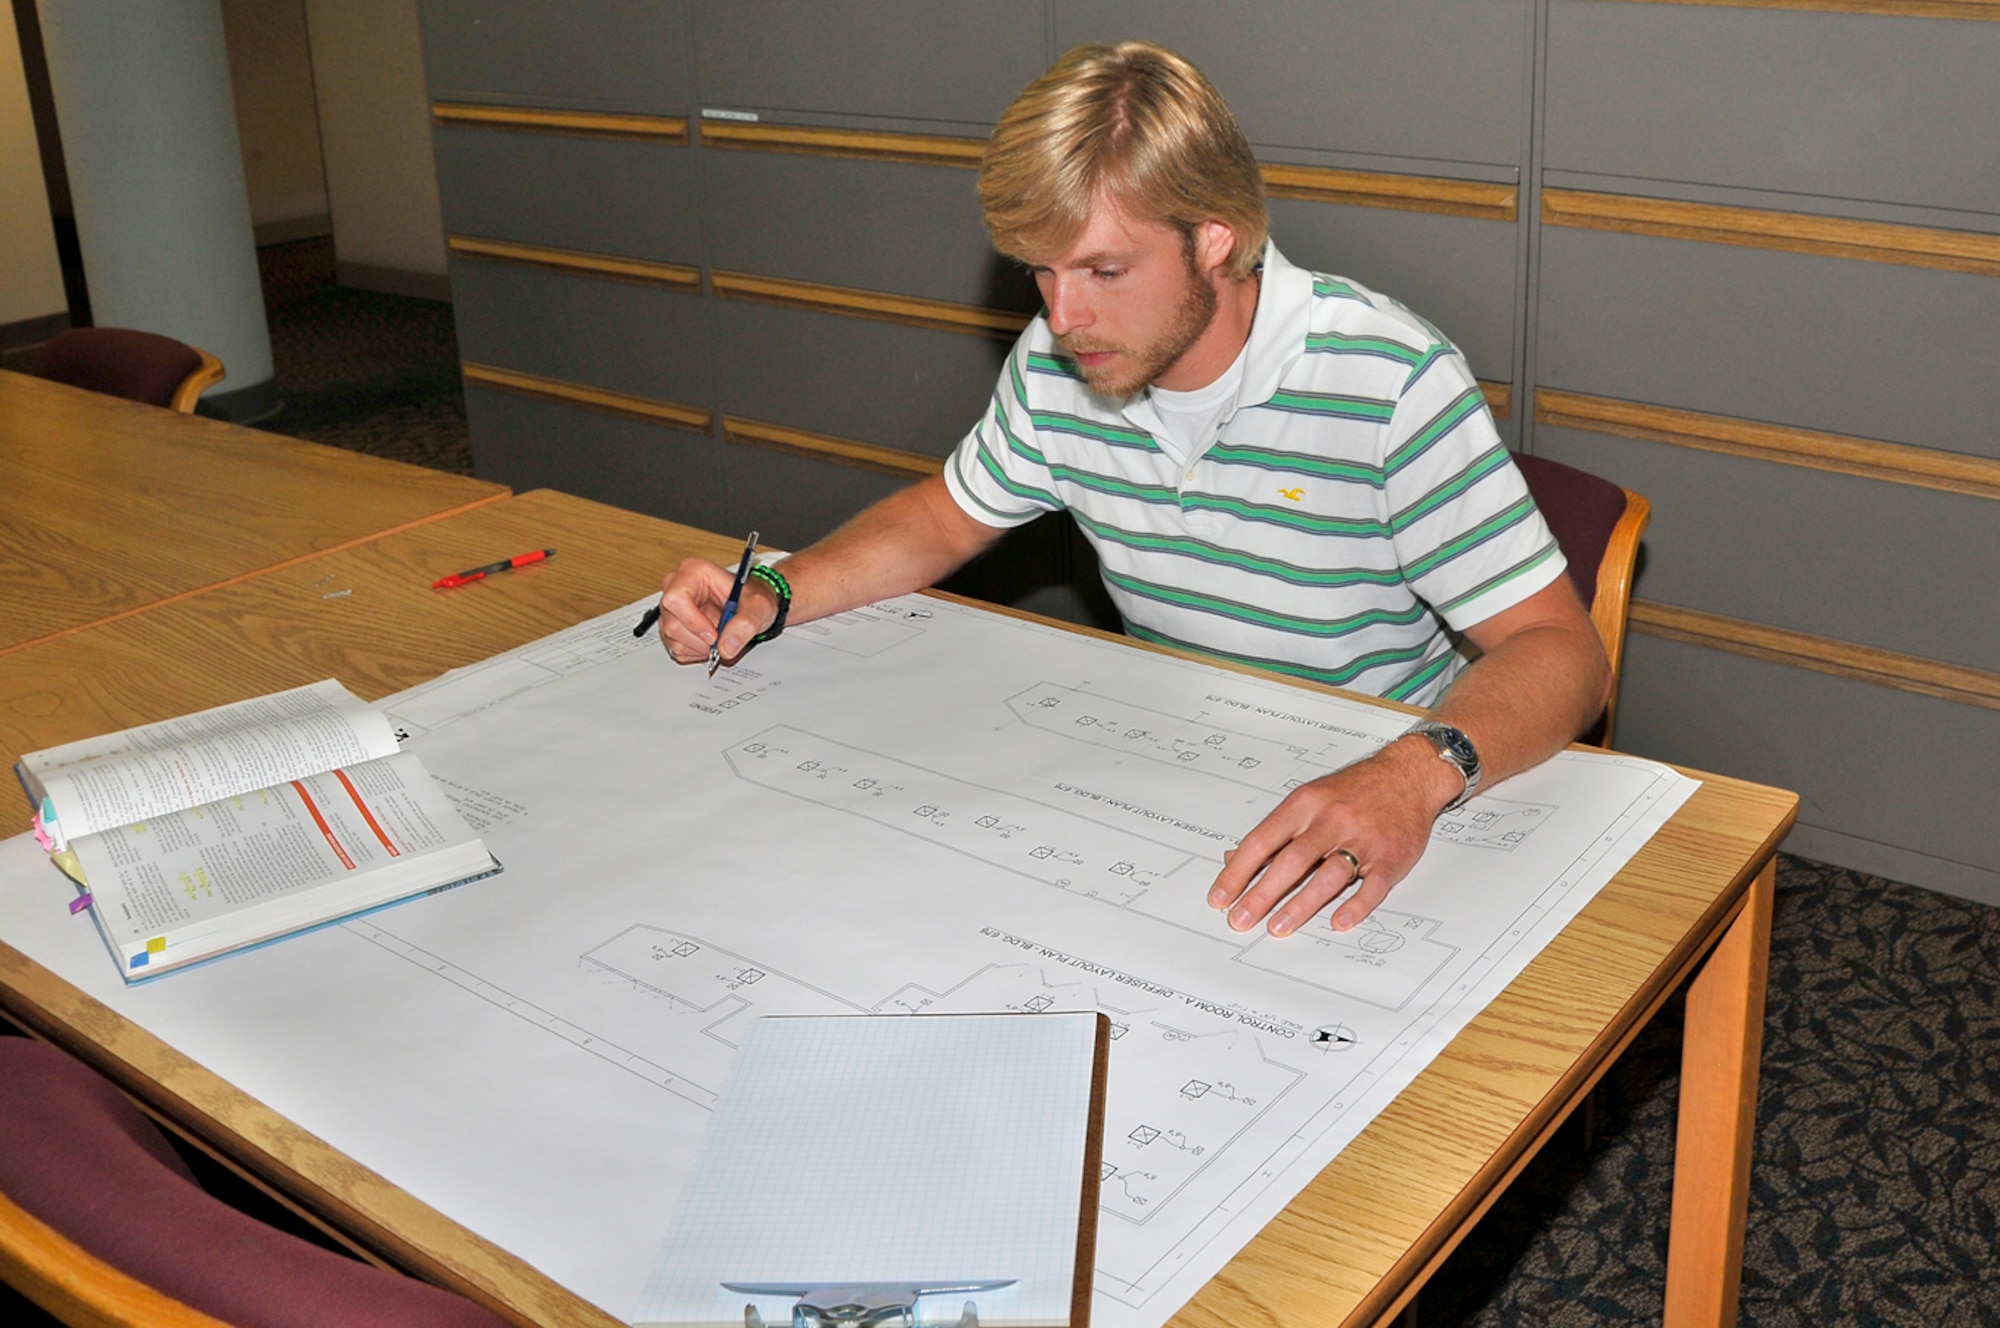 Aaron Wiser, an ATA Design Engineering Branch draftsman, employs the newest CADD technology for his work (below), but still gets the big picture with actual drawings and blueprints of a project. Wiser just graduated from the University of Tennessee at Chattanooga with a bachelor’s of science degree in mechanical engineering. (Photos by Jacqueline Cowan)